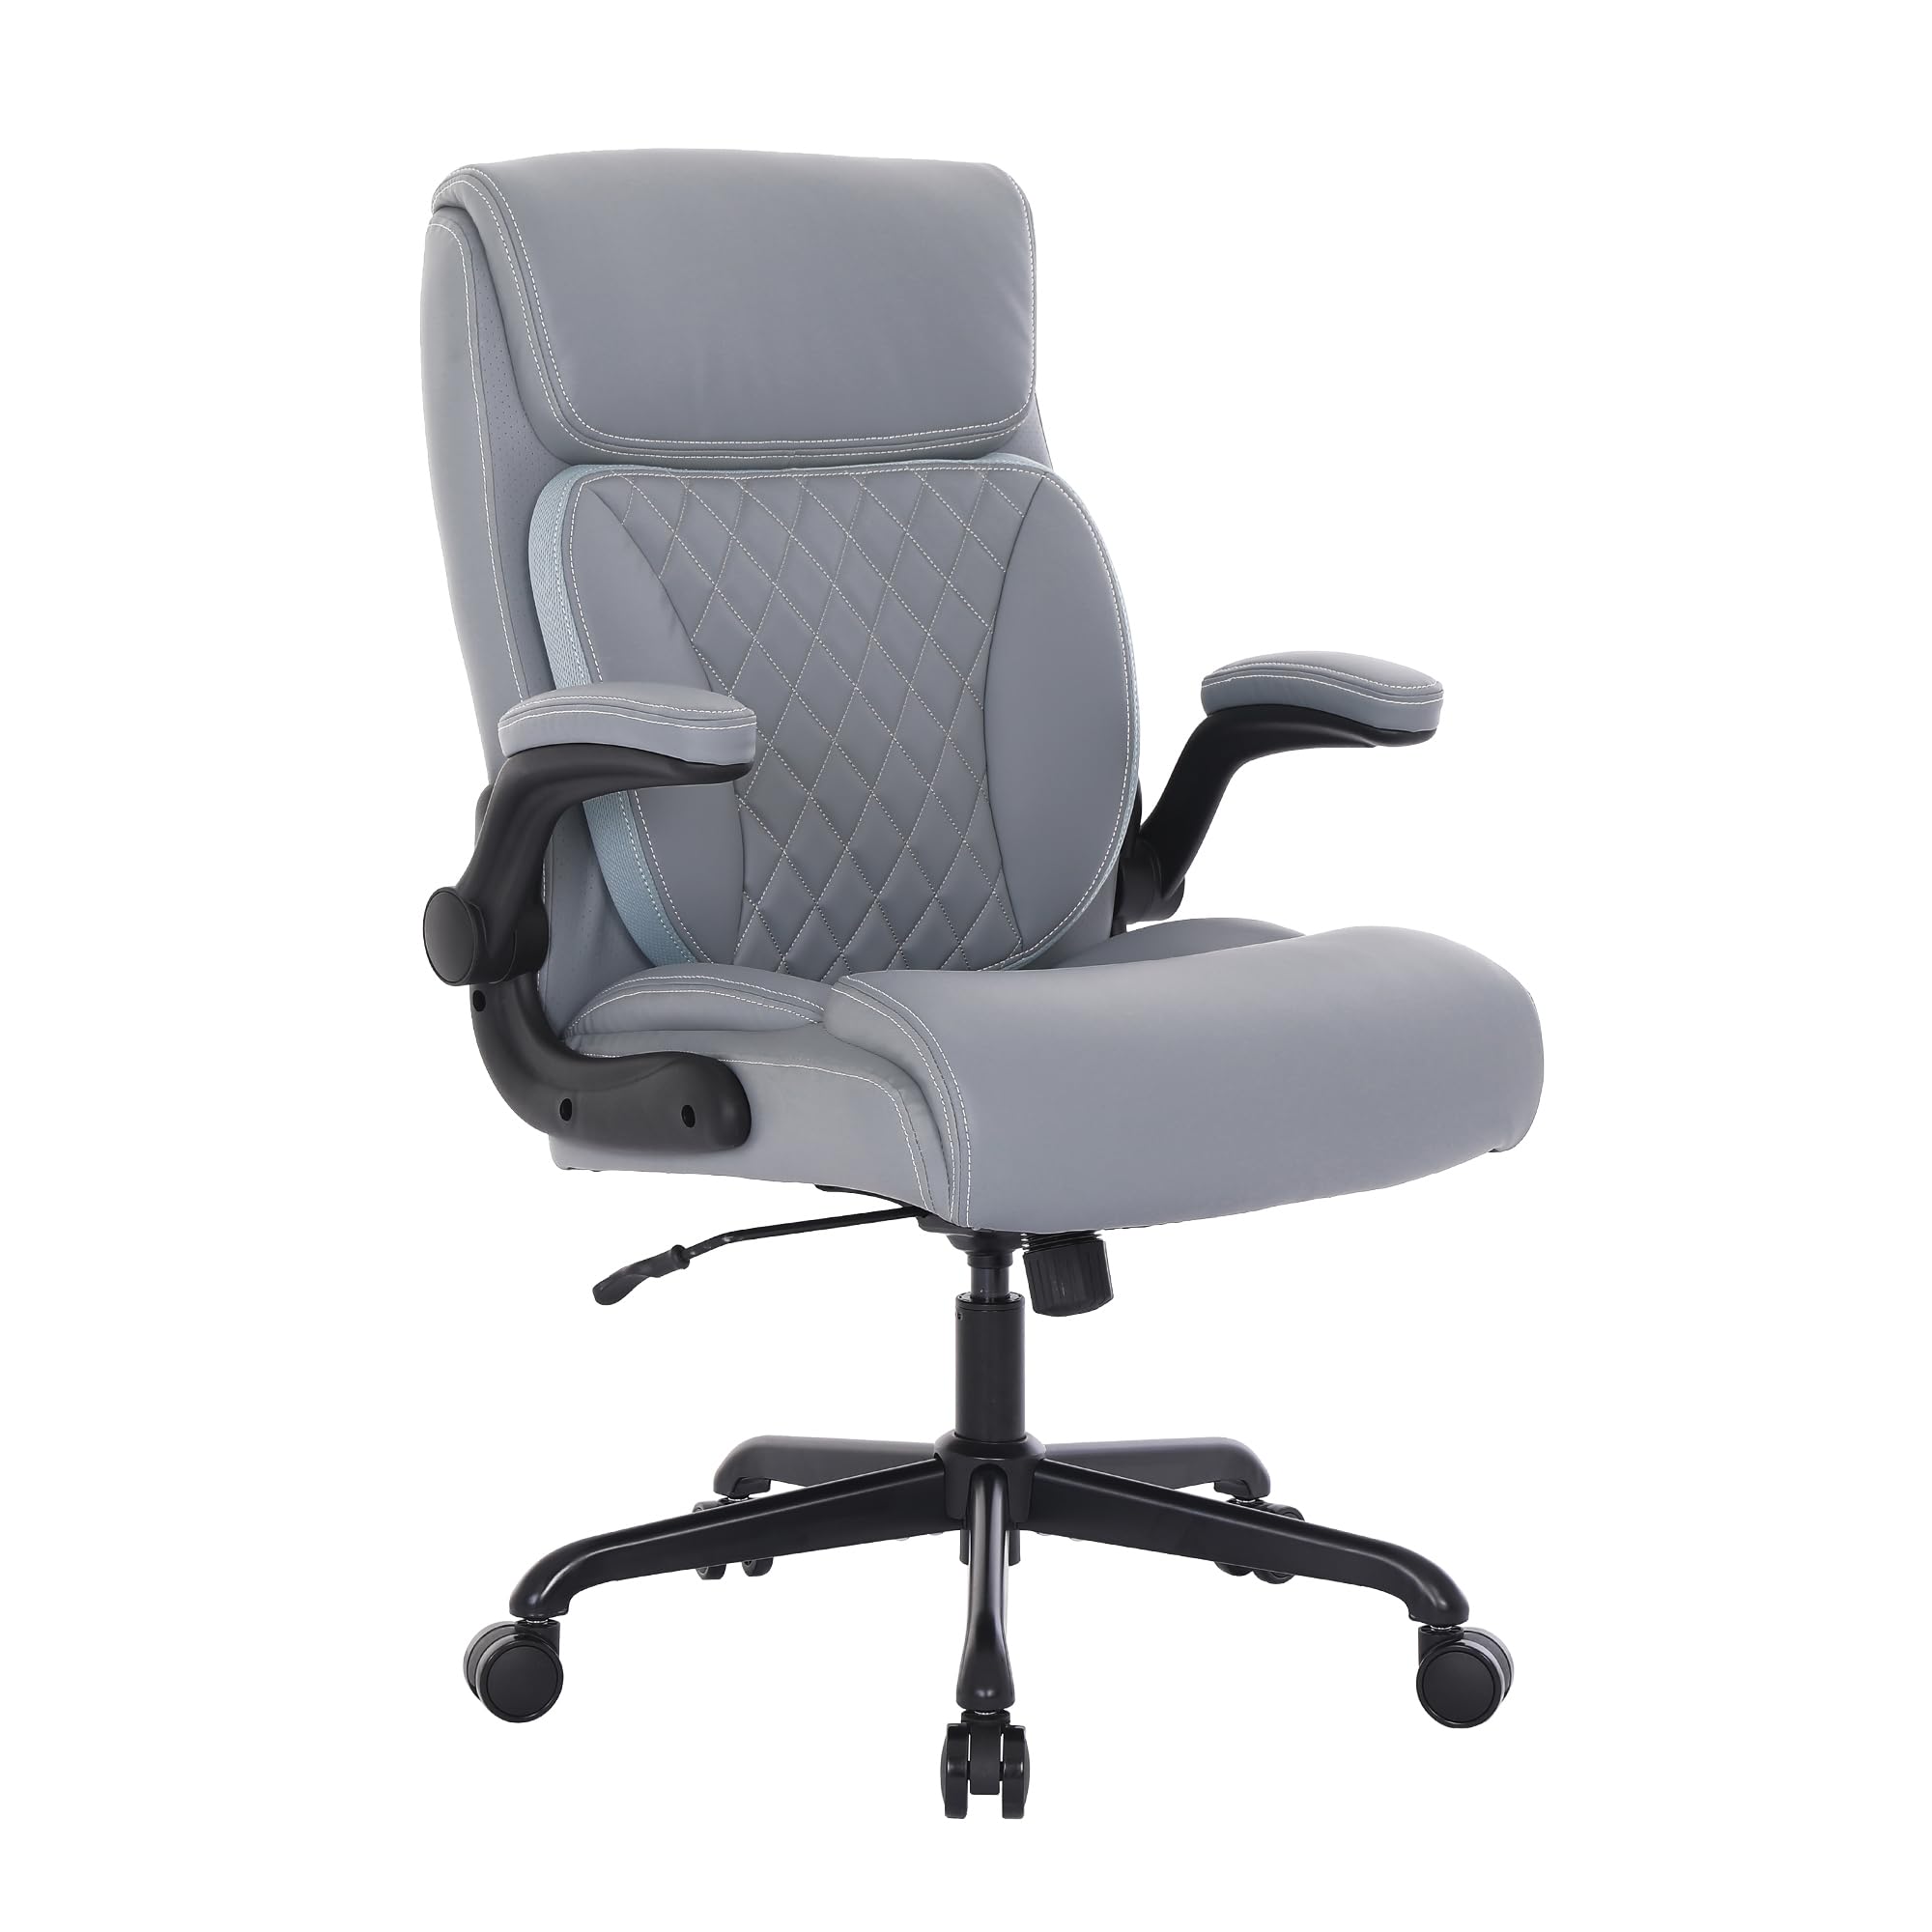 Executive Office Chair, Ergonomic Home Office Desk Chairs, PU Leather Computer Chair with Lumbar Support, Flip-up Armrests and Adjustable Height, Youchauchair High Back Work Chair, Grey